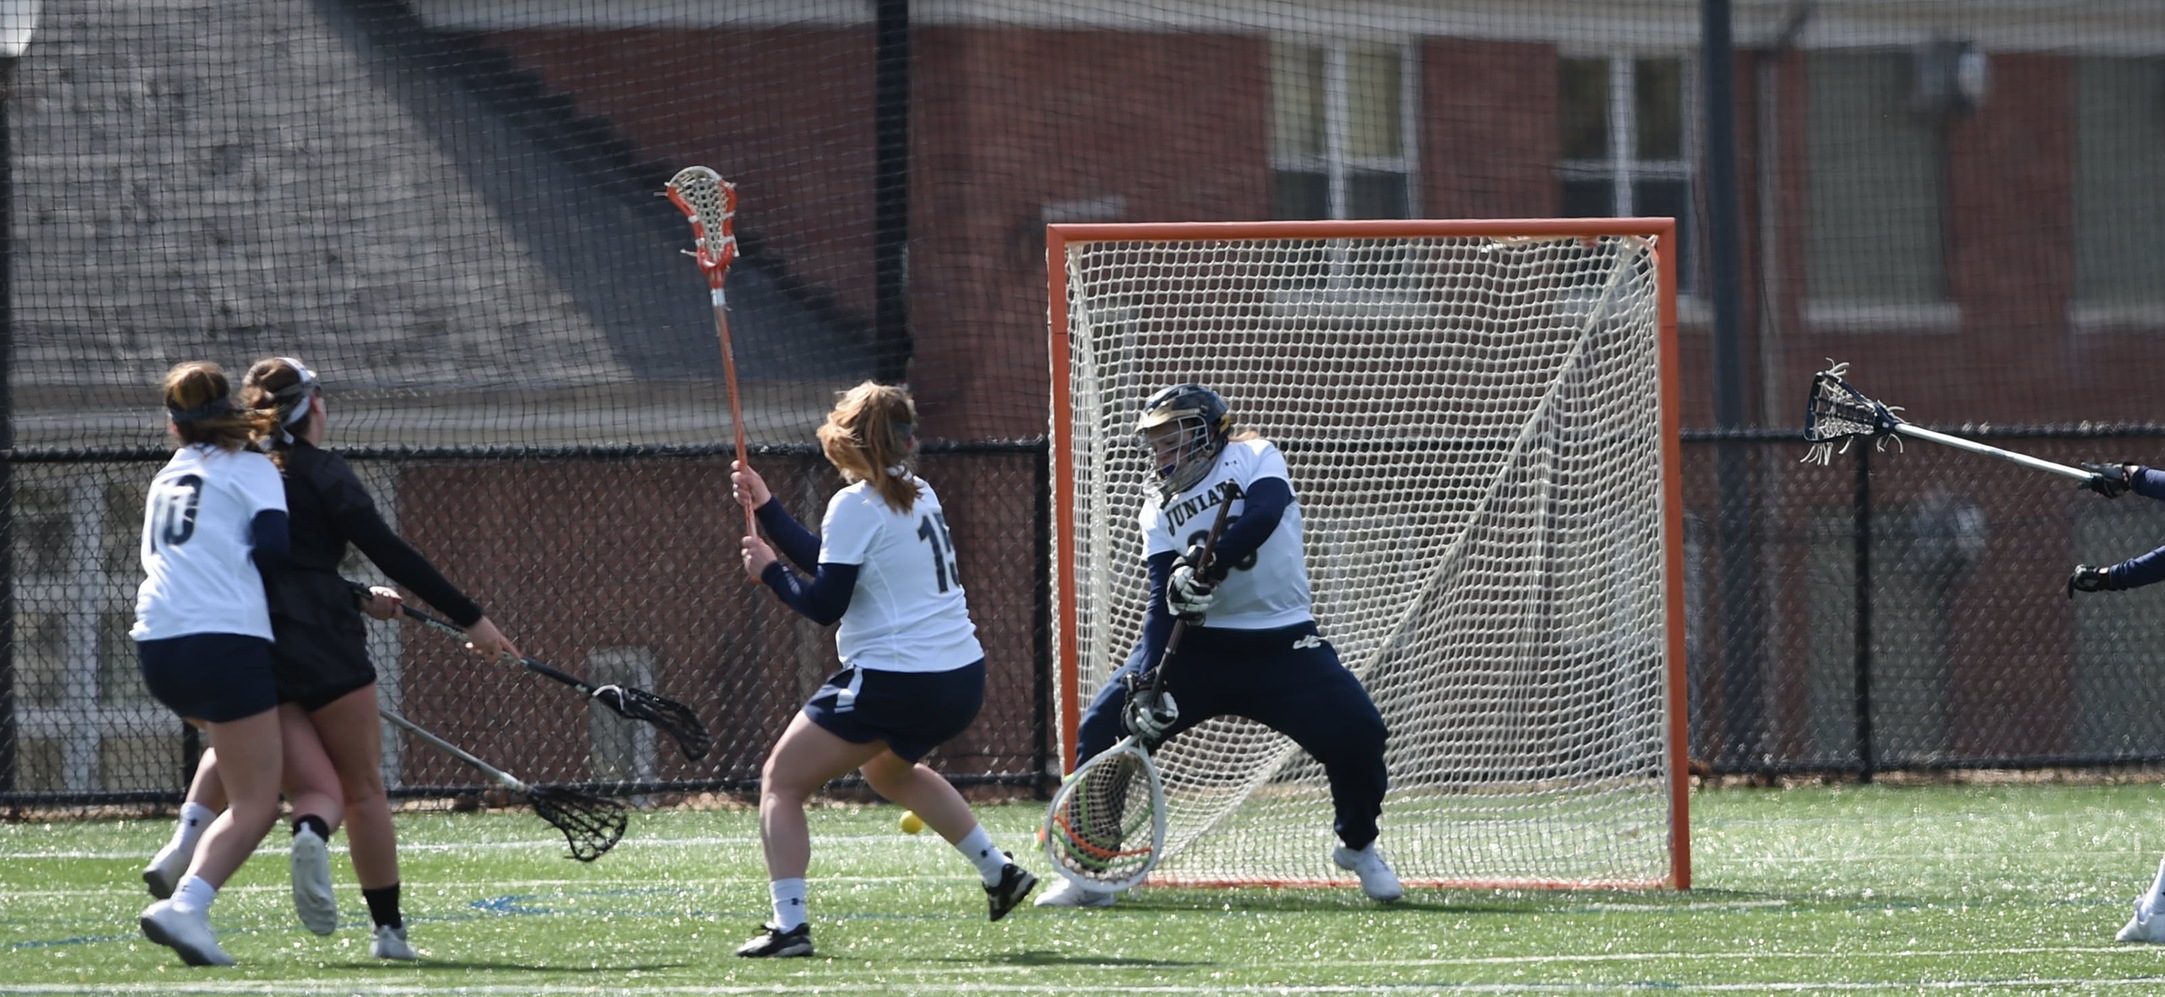 Isabella Medaris made 12 saves in the game against Washington and Jefferson